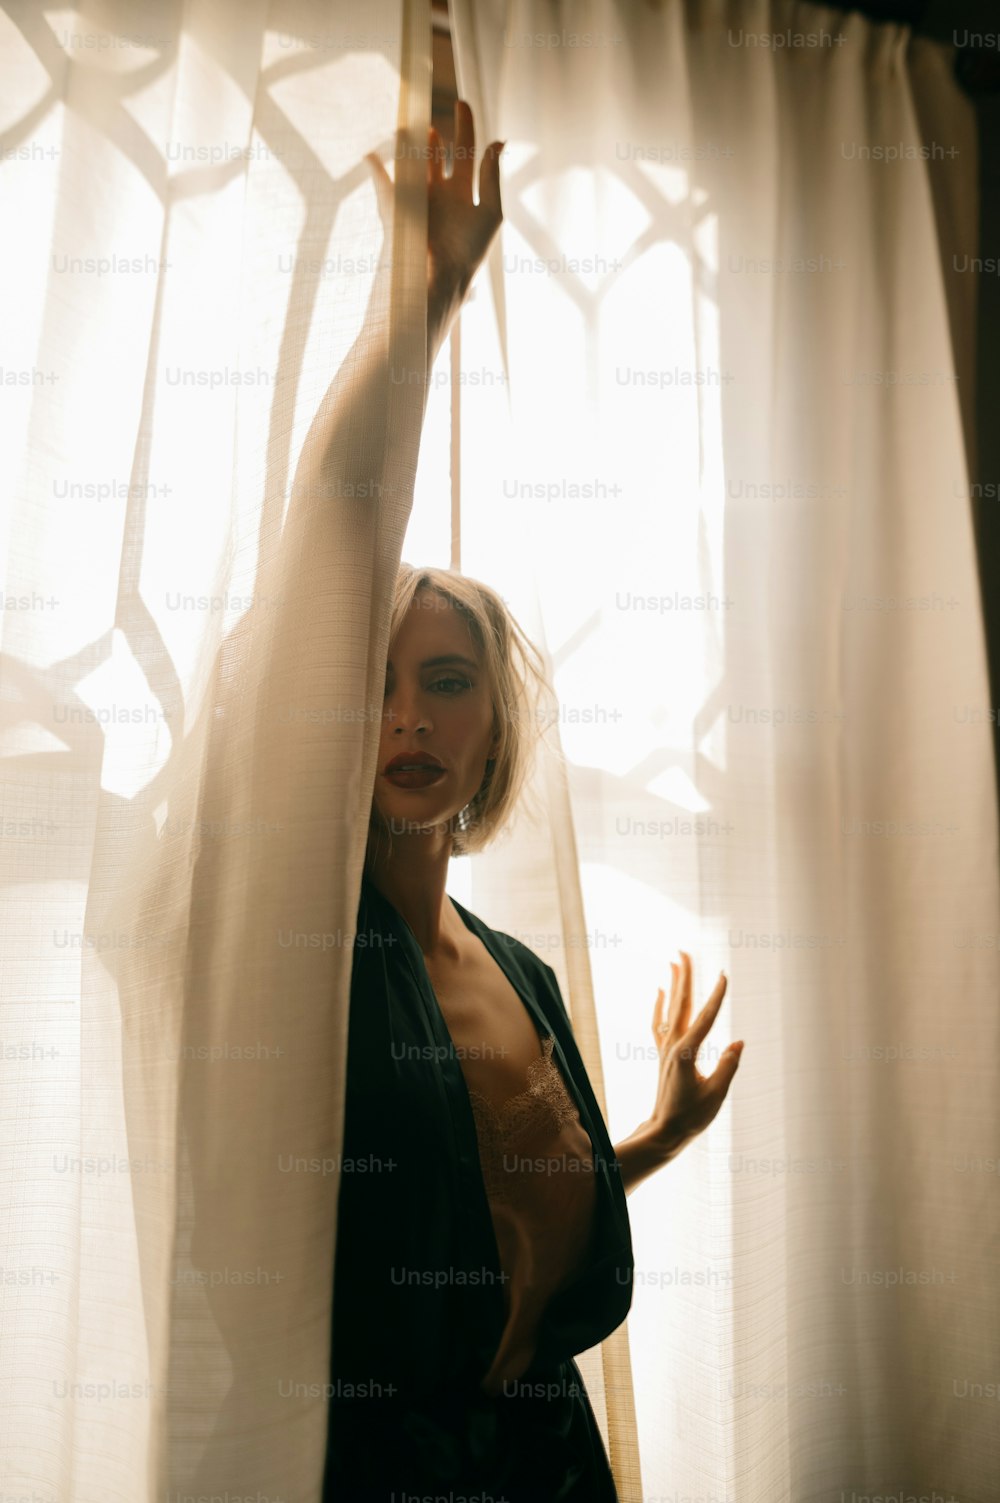 a woman standing in front of a window with sheer curtains